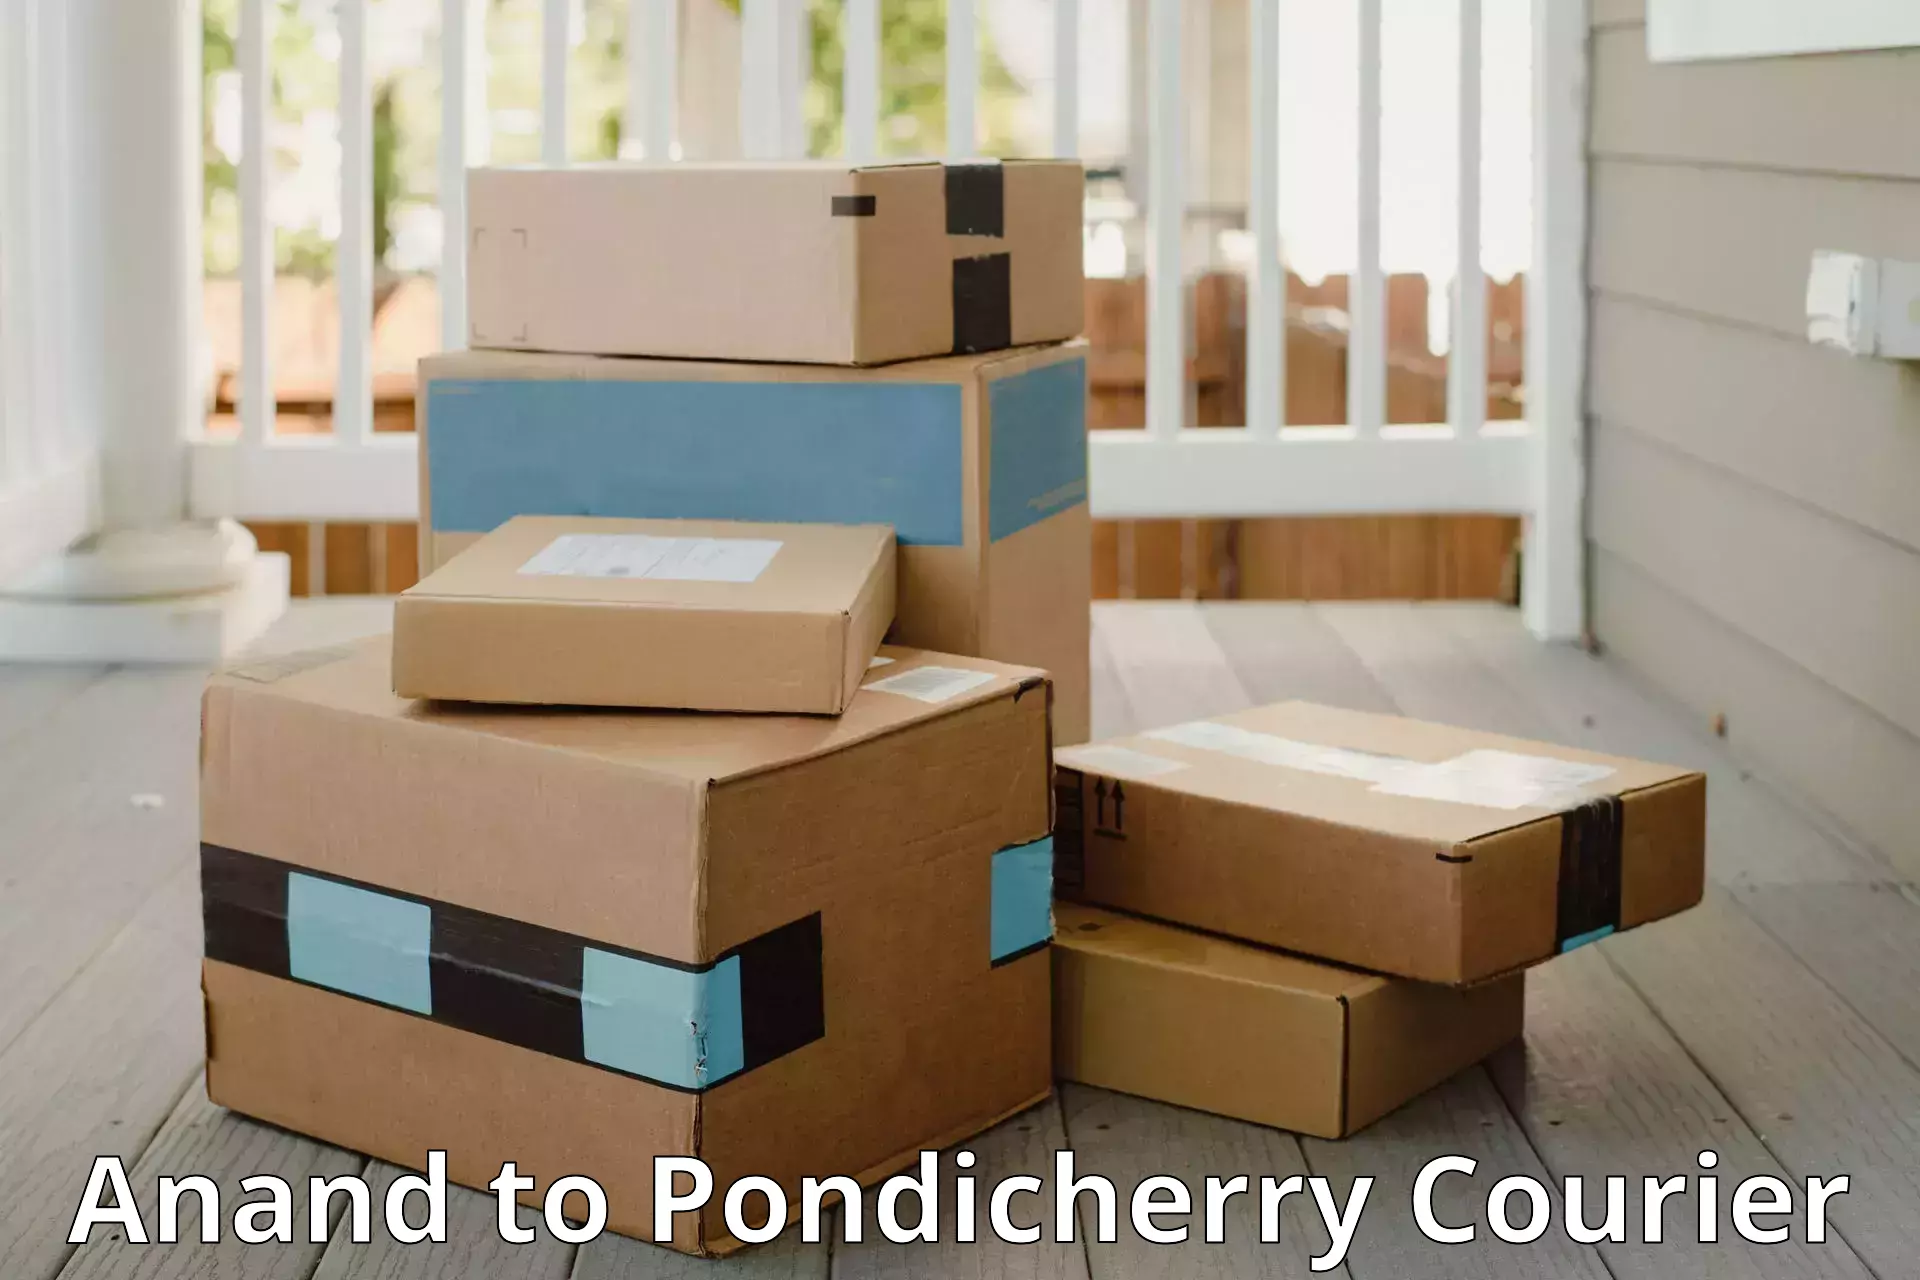 Luggage transport deals Anand to Pondicherry University